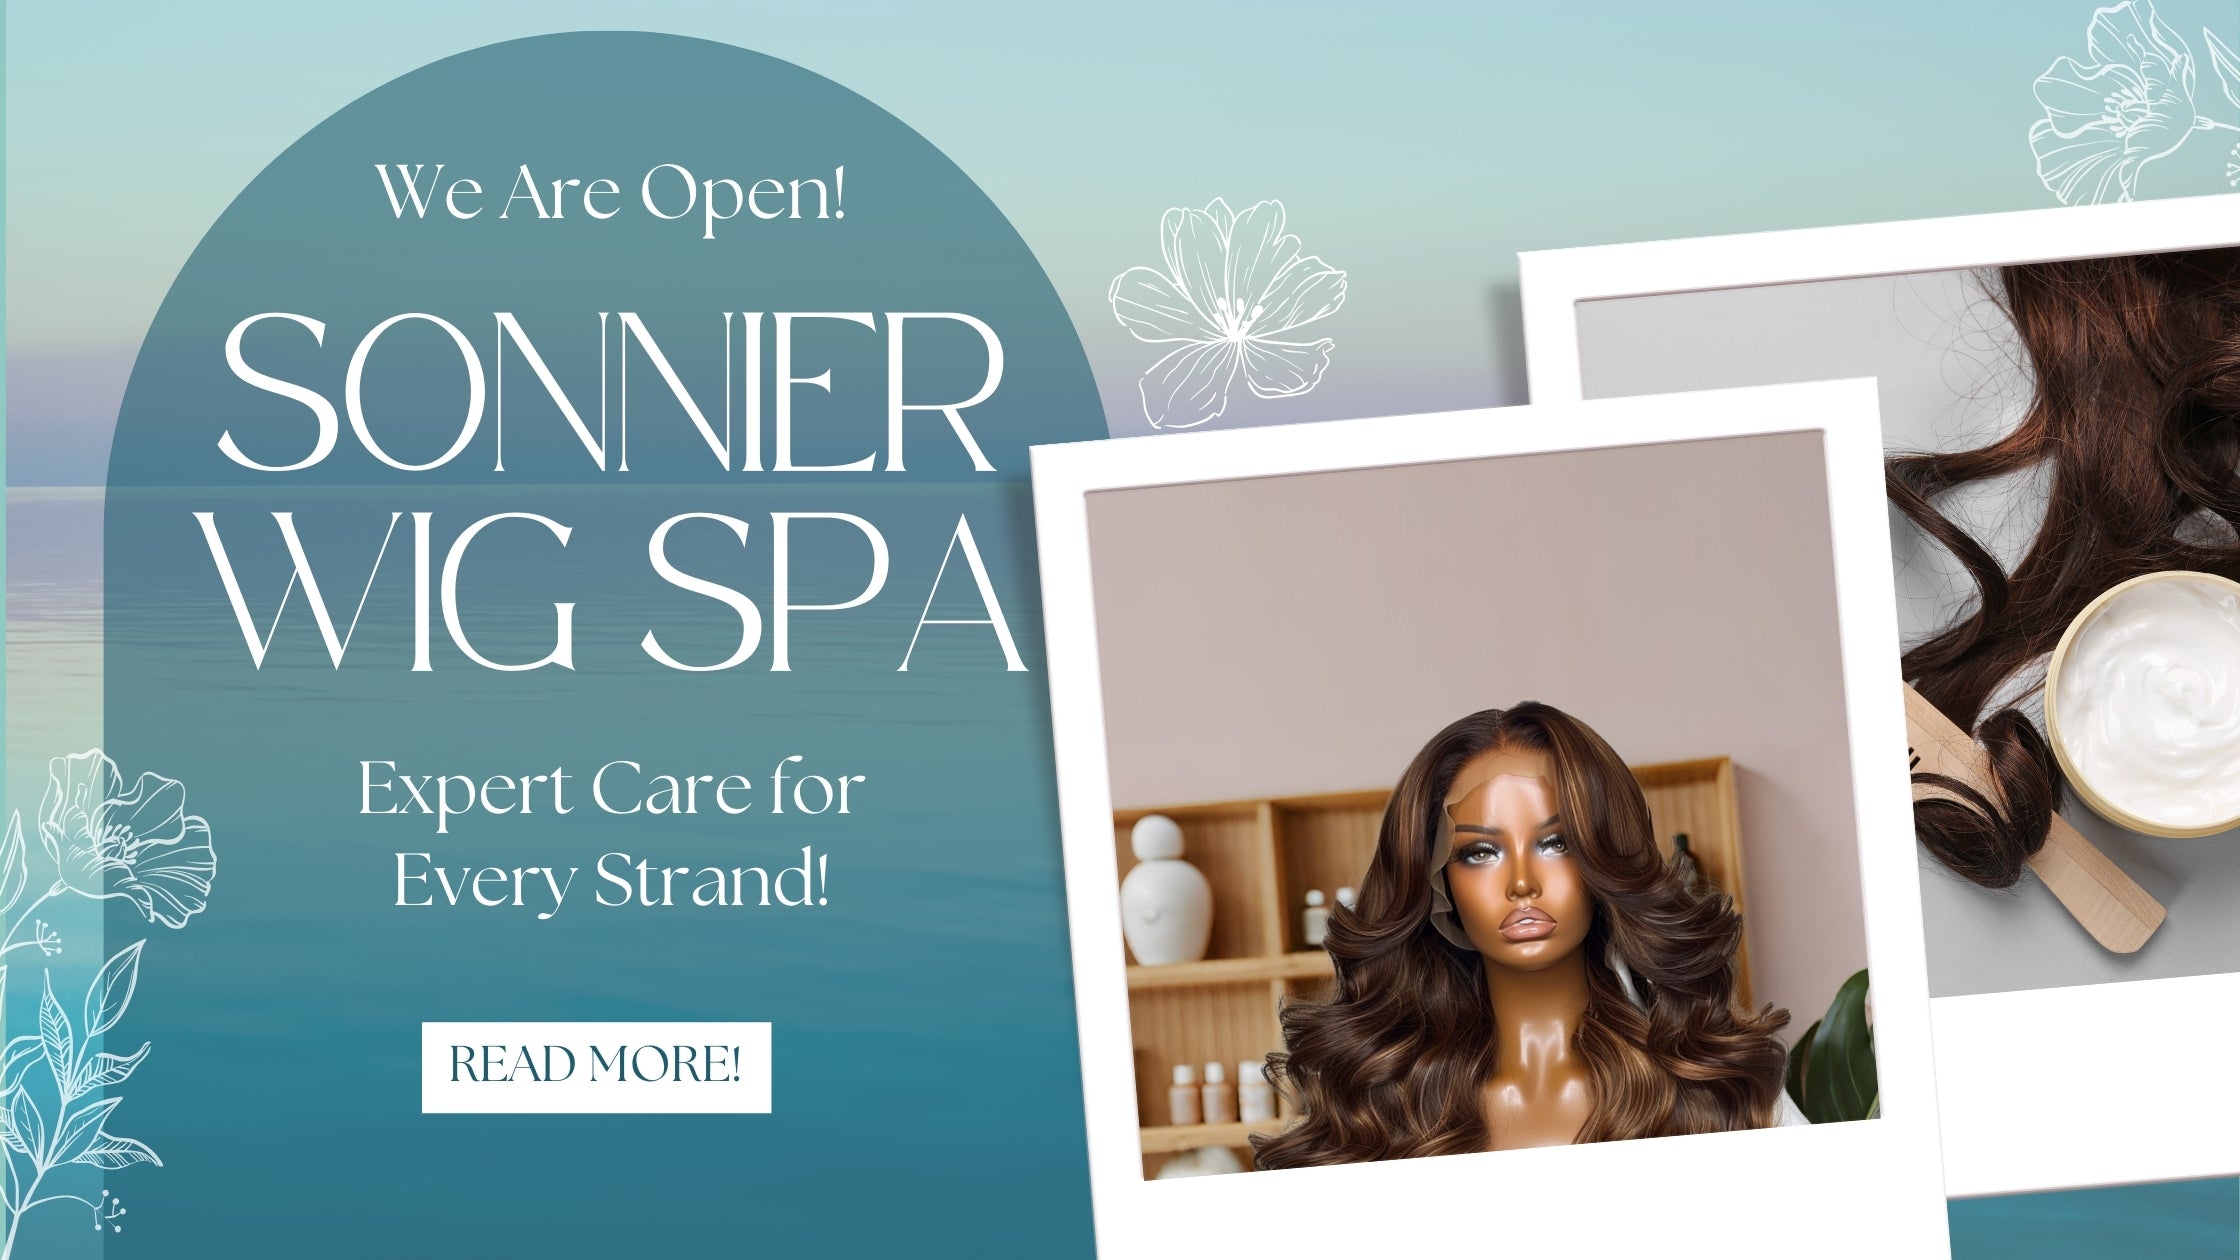 Sonnier Wig Spa Opening Blog Image